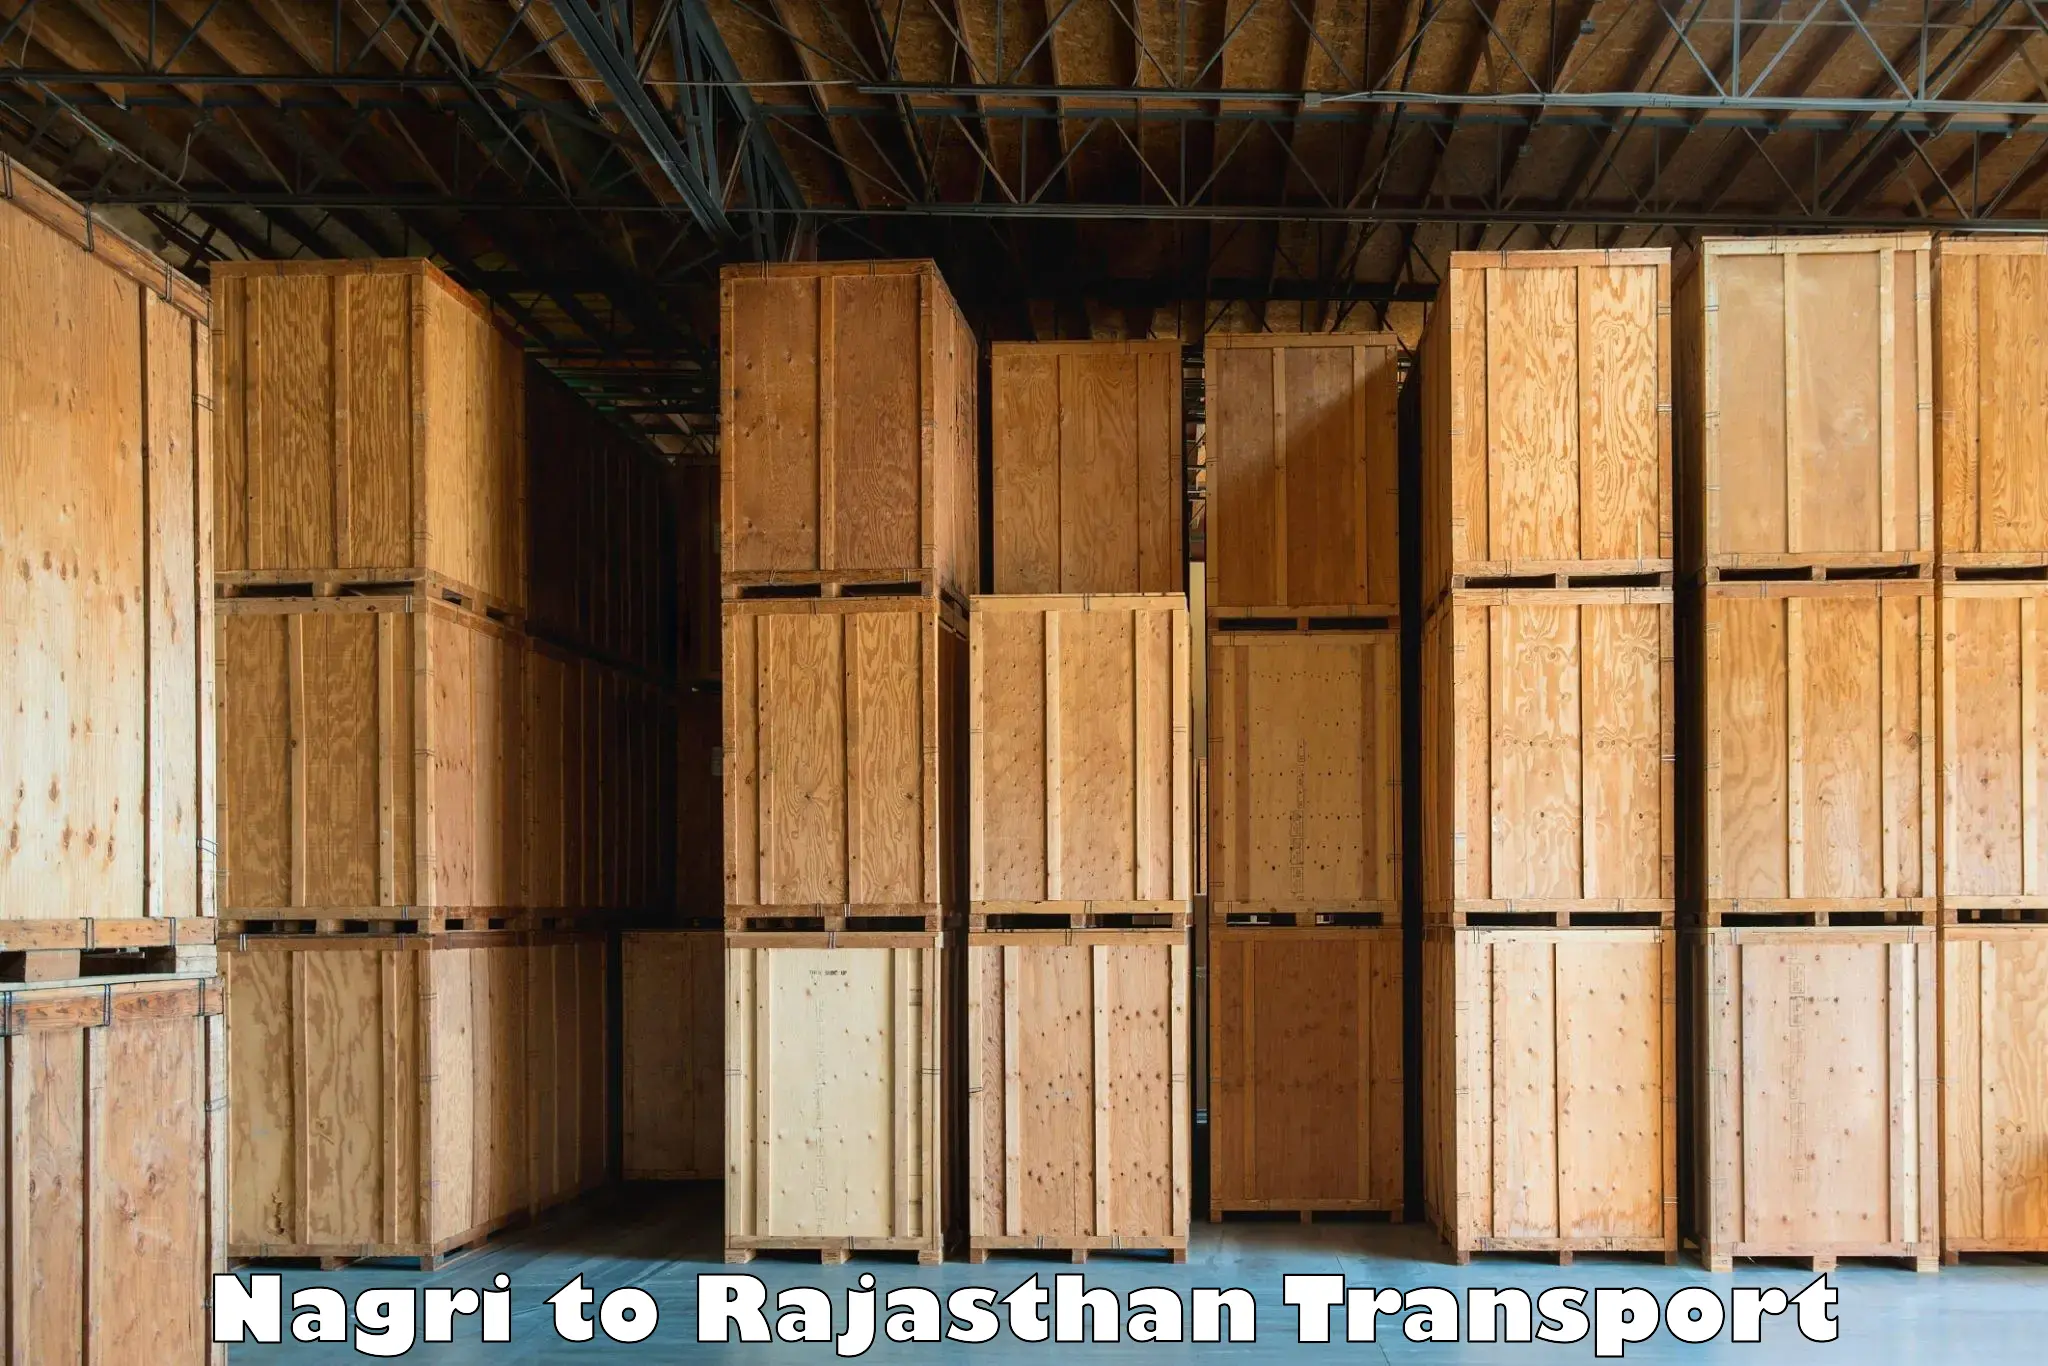 Truck transport companies in India Nagri to Rajasthan